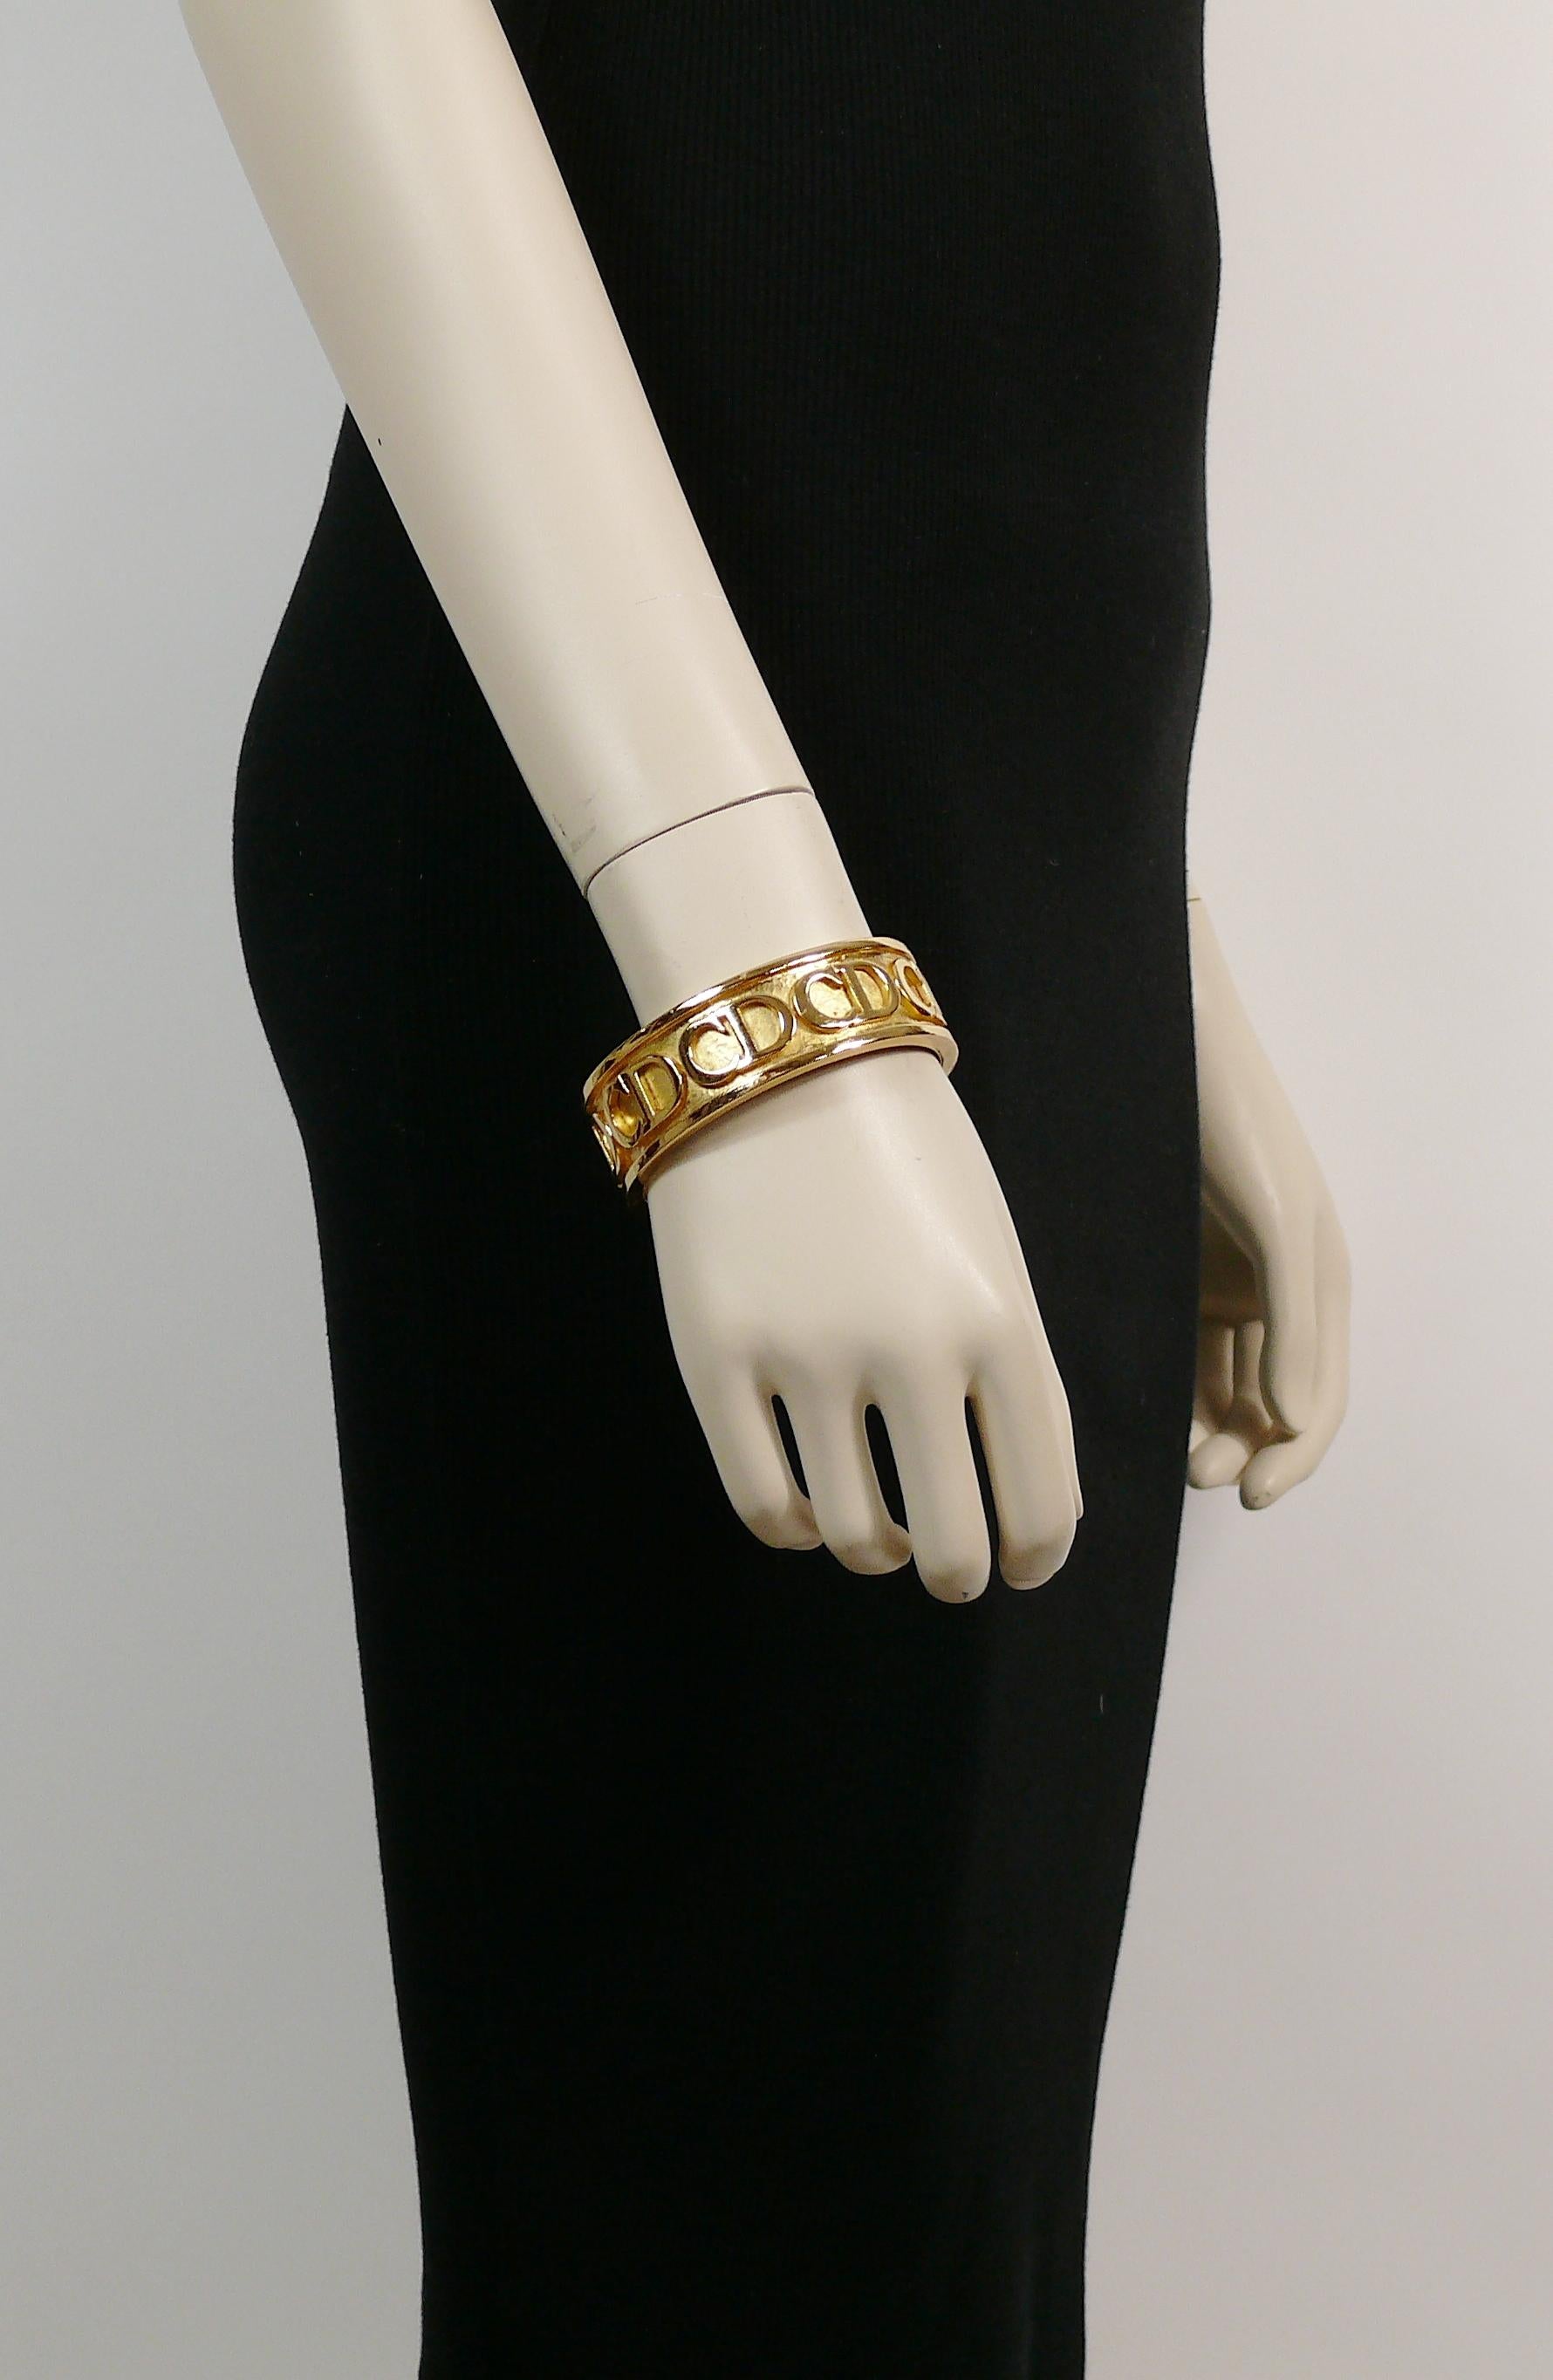 CHRISTIAN DIOR vintage gold toned rigid bracelet featuring CD monograms on a textured background.

Marked CHR. DIOR.
Germany.

Indicative measurements : inner circumference approx. 20.42 cm (8.04 inches) / width approx. 2.2 cm (0.87 inch).

NOTES
-